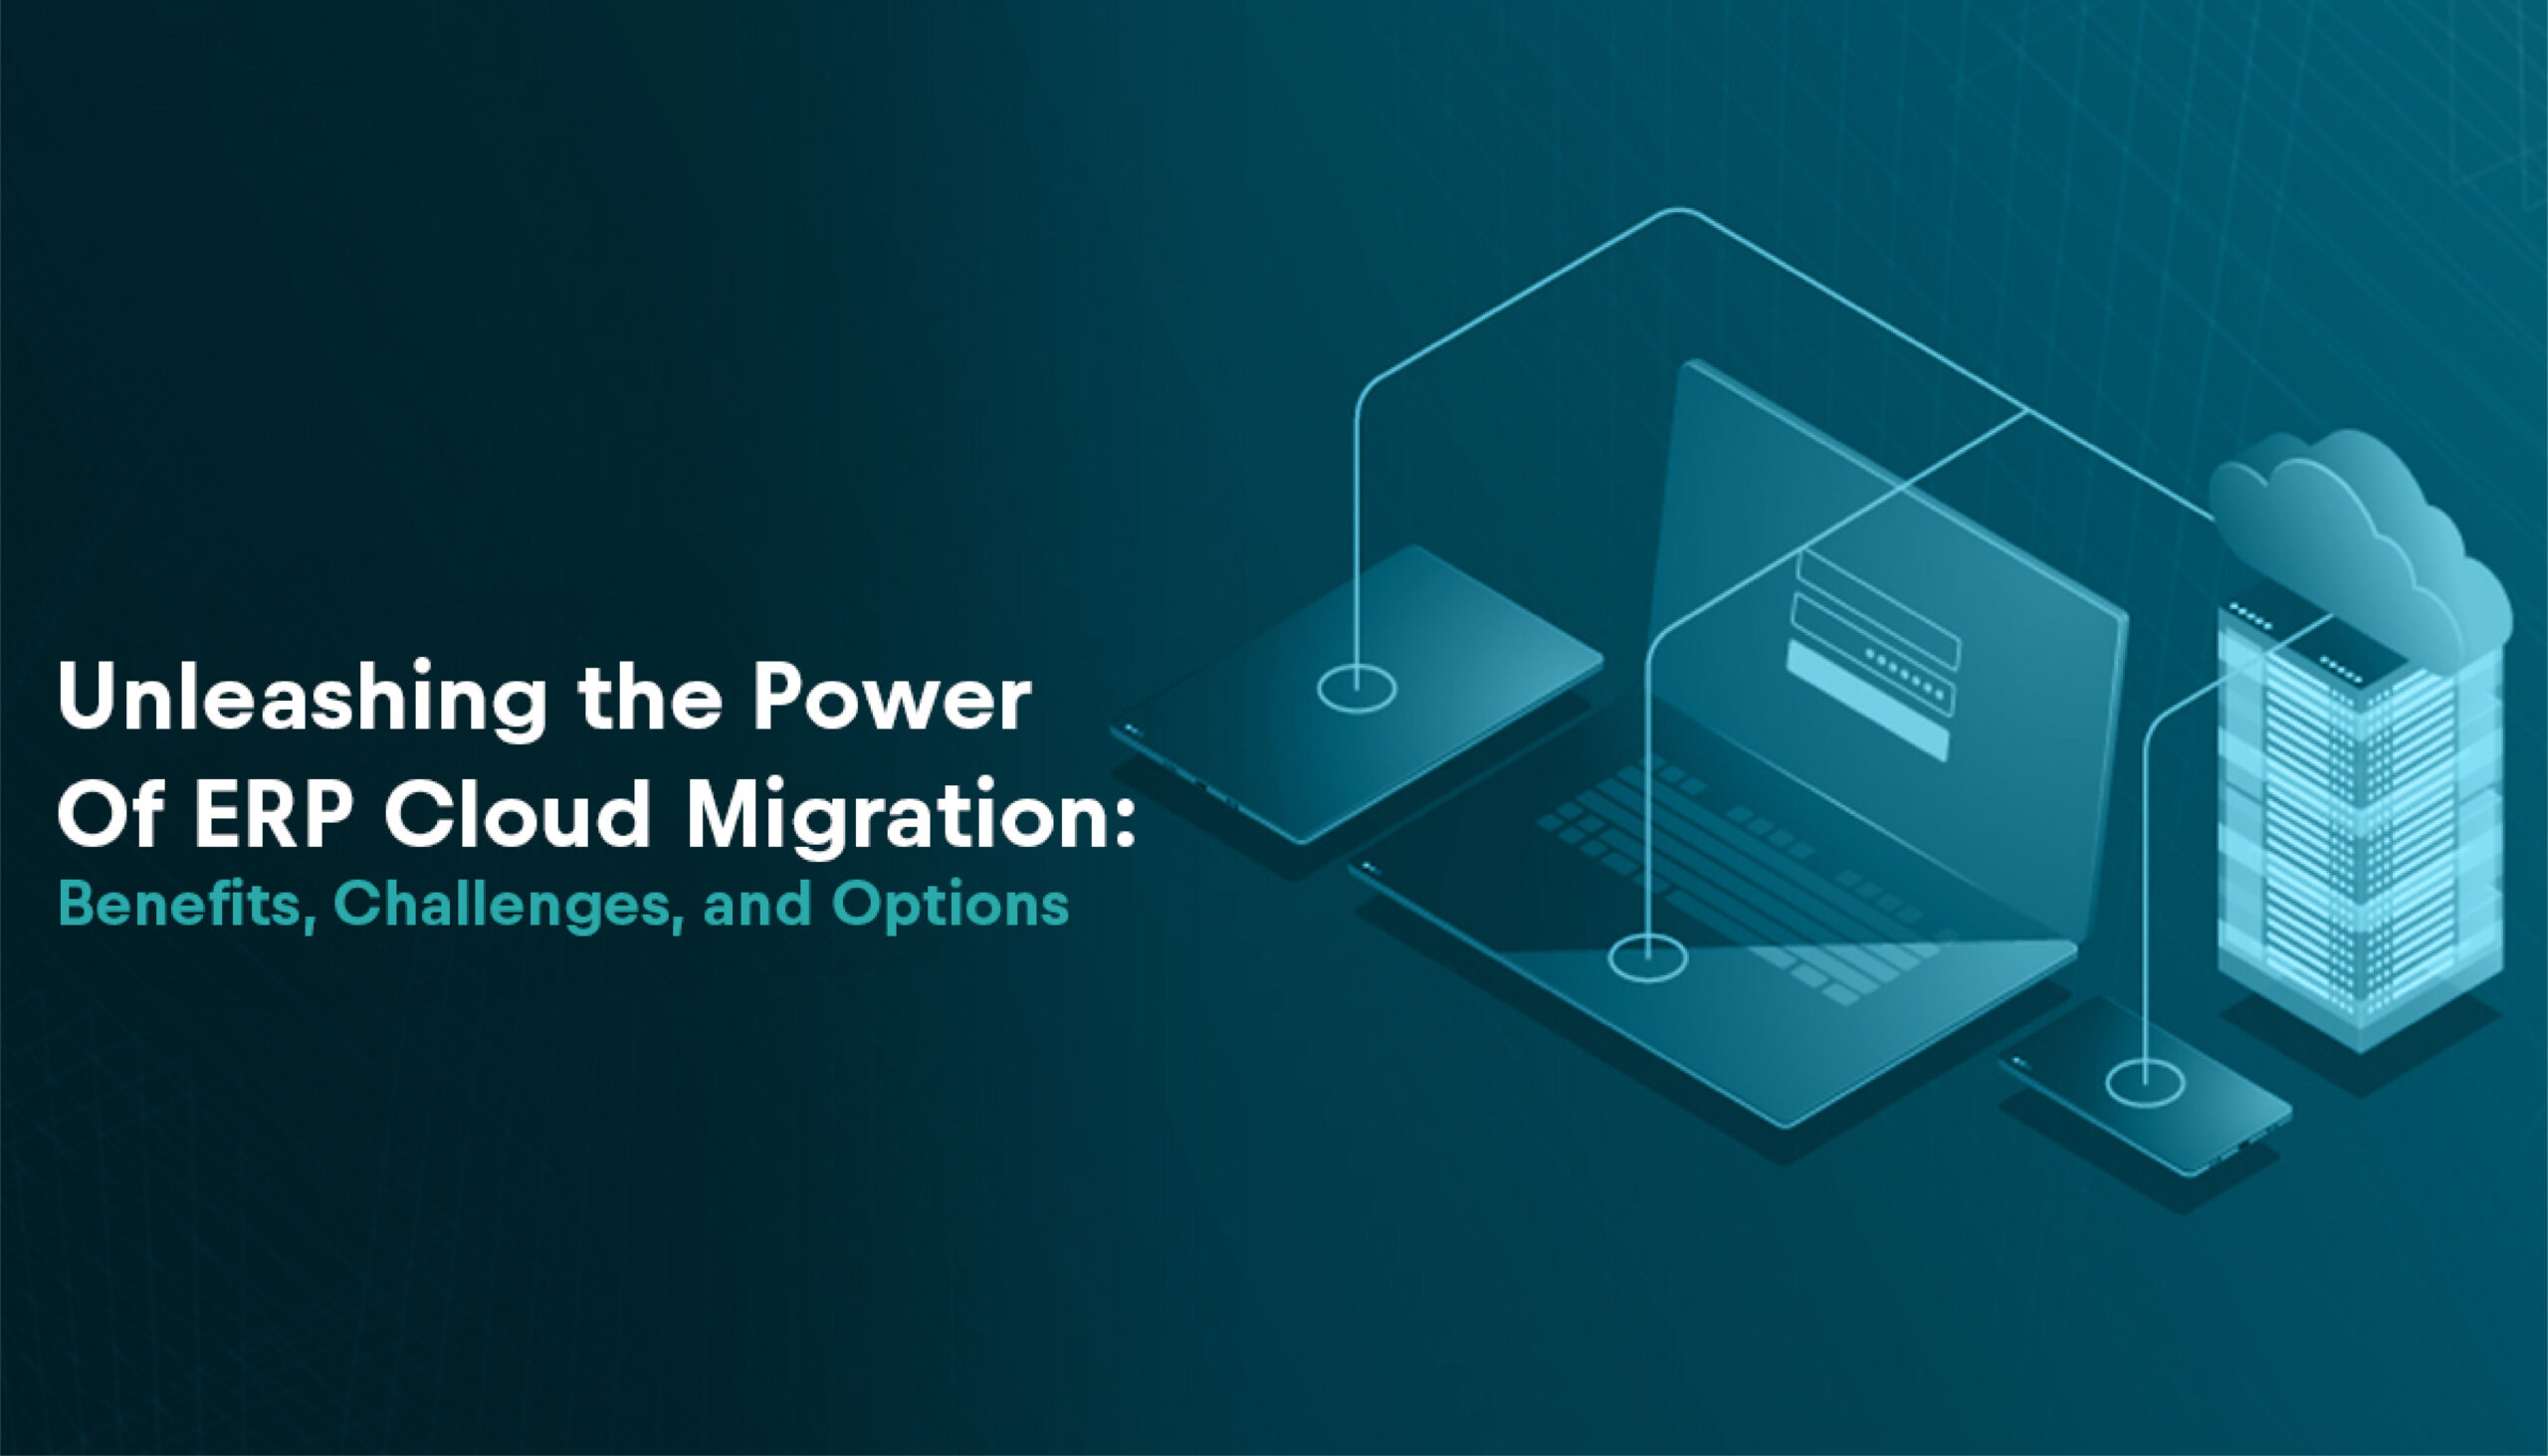 Unleashing the Power of ERP Cloud Migration: Benefits, Challenges, and Options